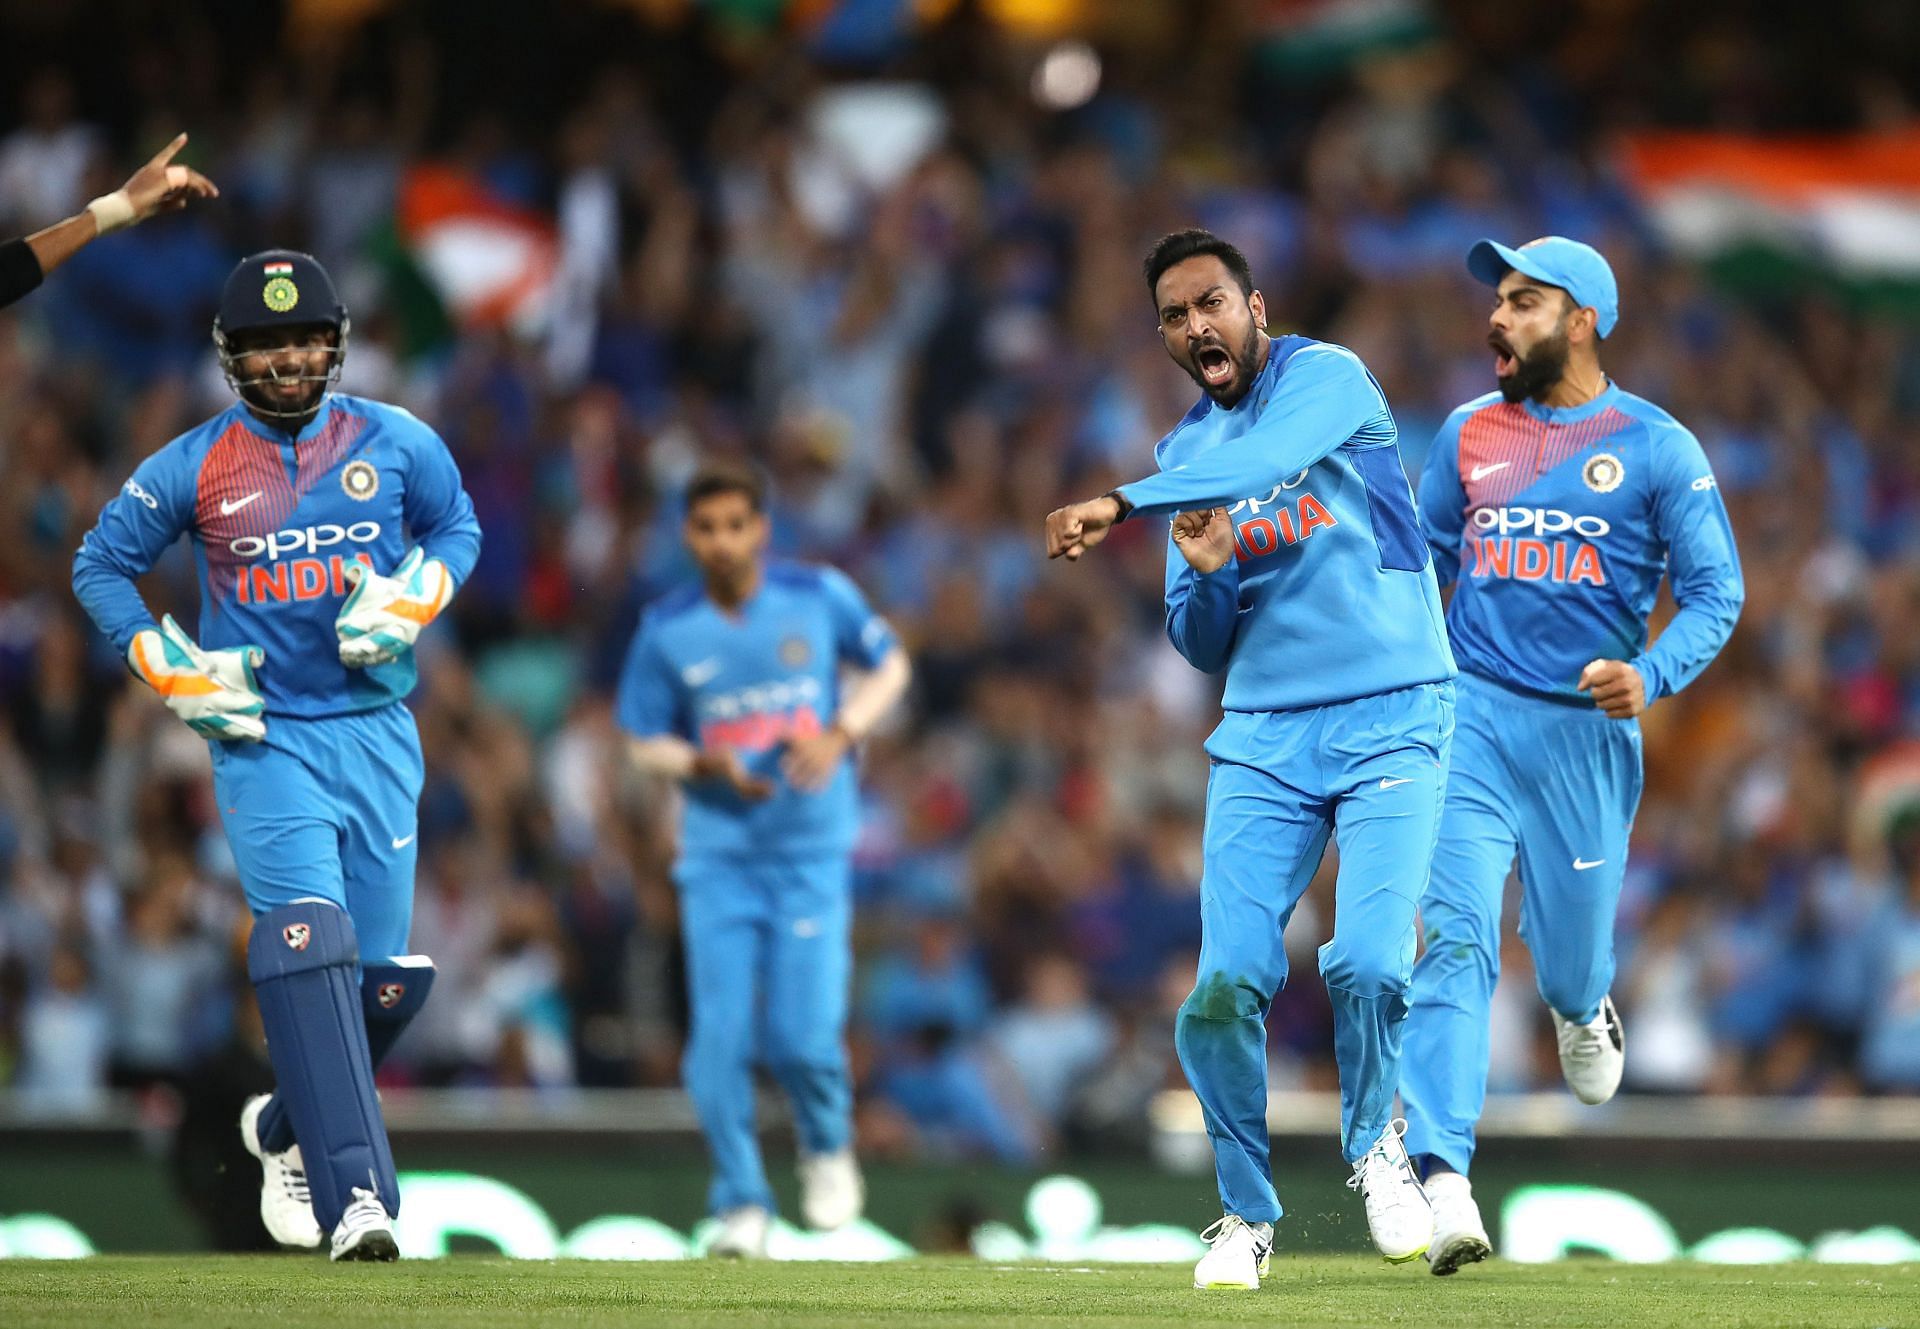 Indian team left arm spinner Krunal Pandya celebrates after taking the wicket from Ben McDermott in the 2018 Sydney T20I. Image: Getty Images